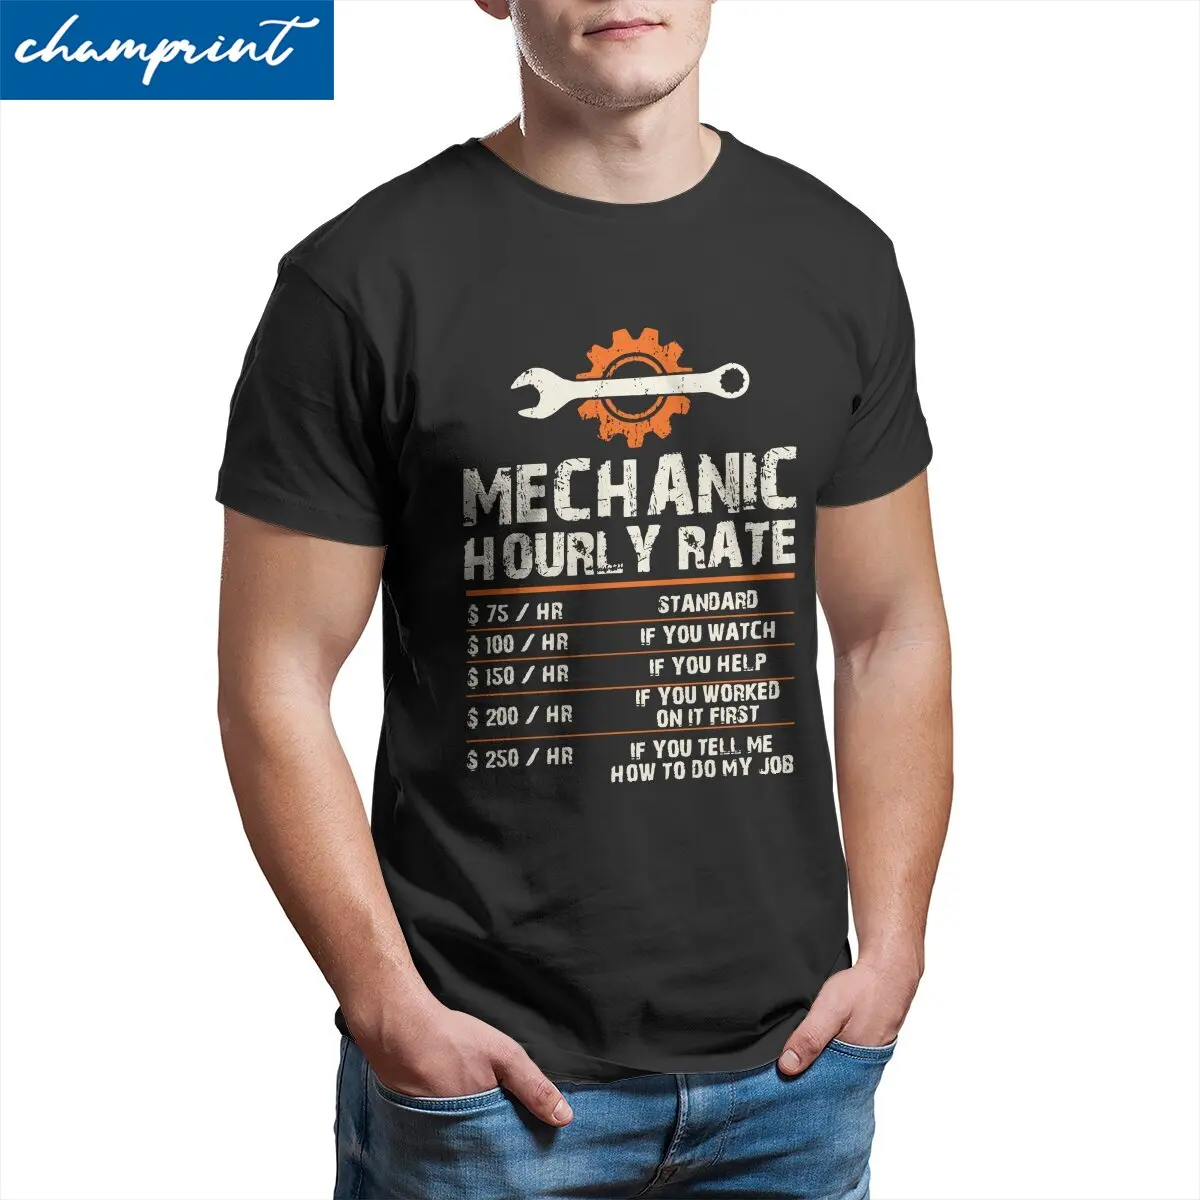 

Novelty Funny Mechanic Hourly Labor Rates T-Shirts Men Crew Neck 100% Cotton T Shirts Short Sleeve Tee Shirt Plus Size Clothes